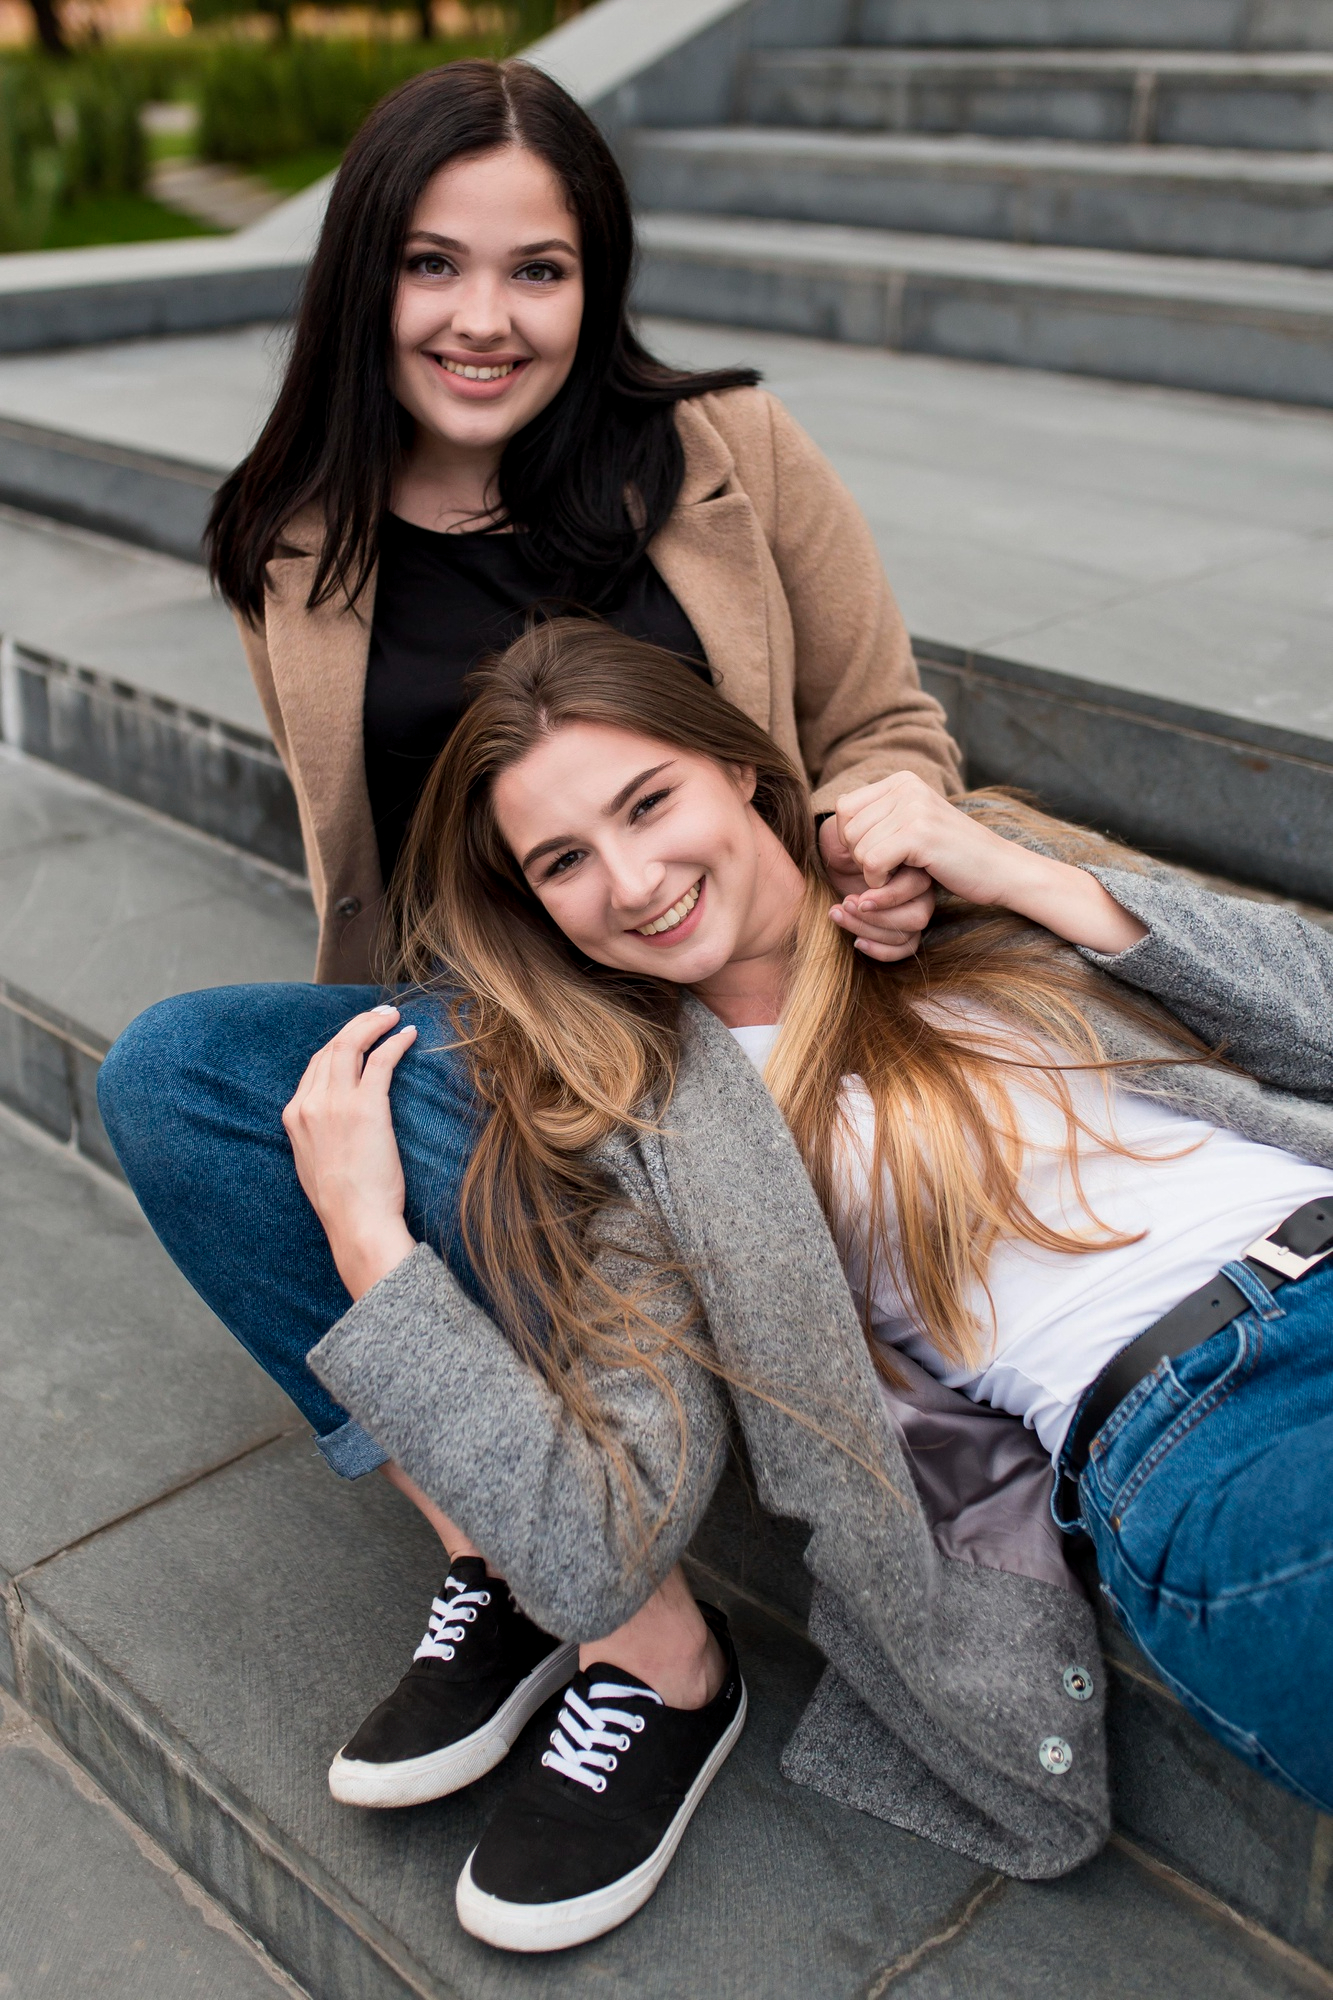 Two happy young women bonding outside on stairs | Source: Freepik